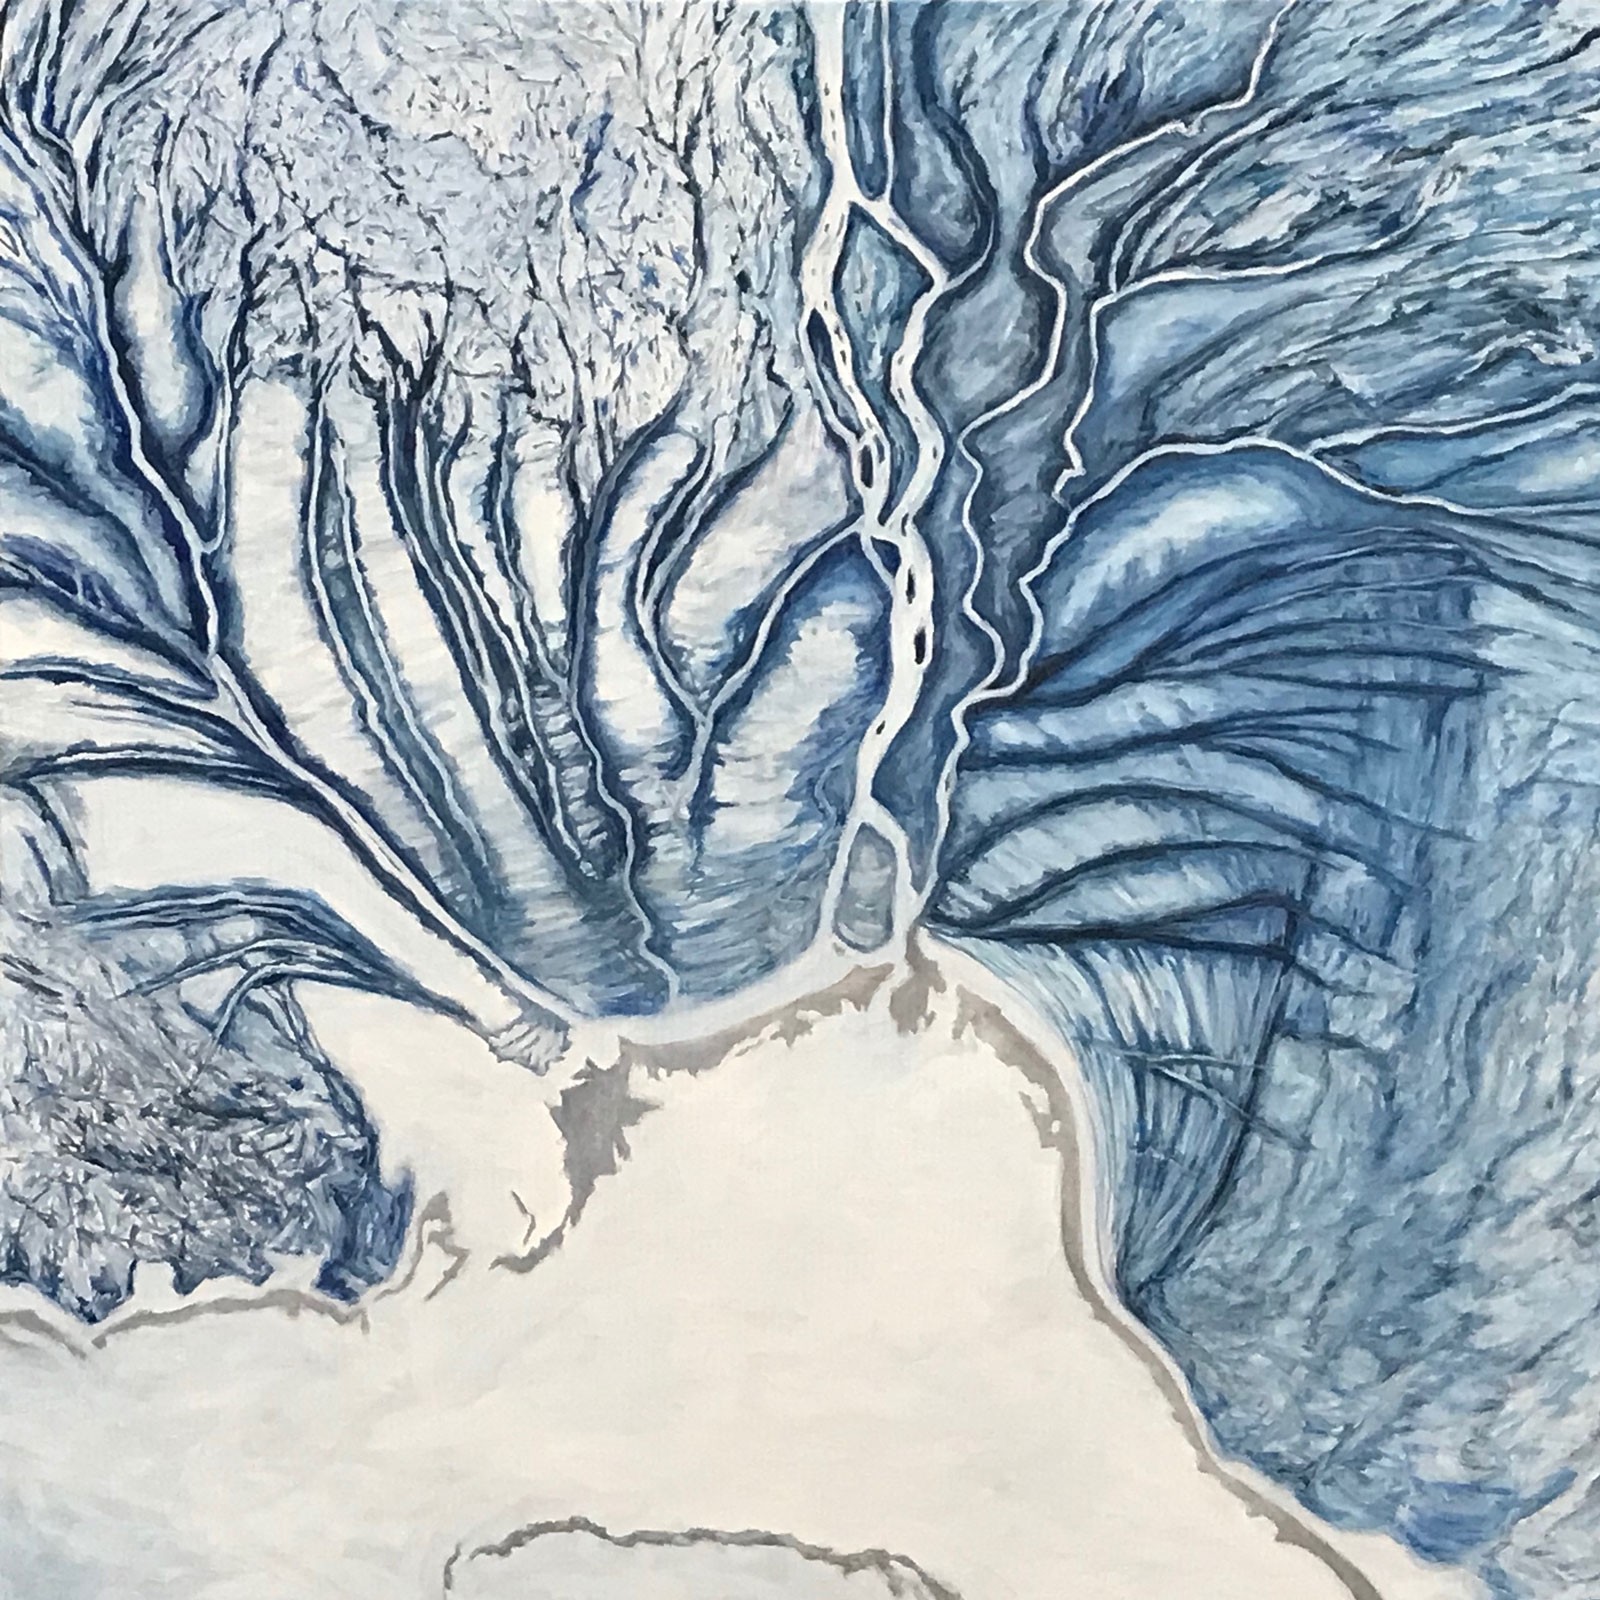 View of ice melt in the Hudson Bay in abstract blue, white